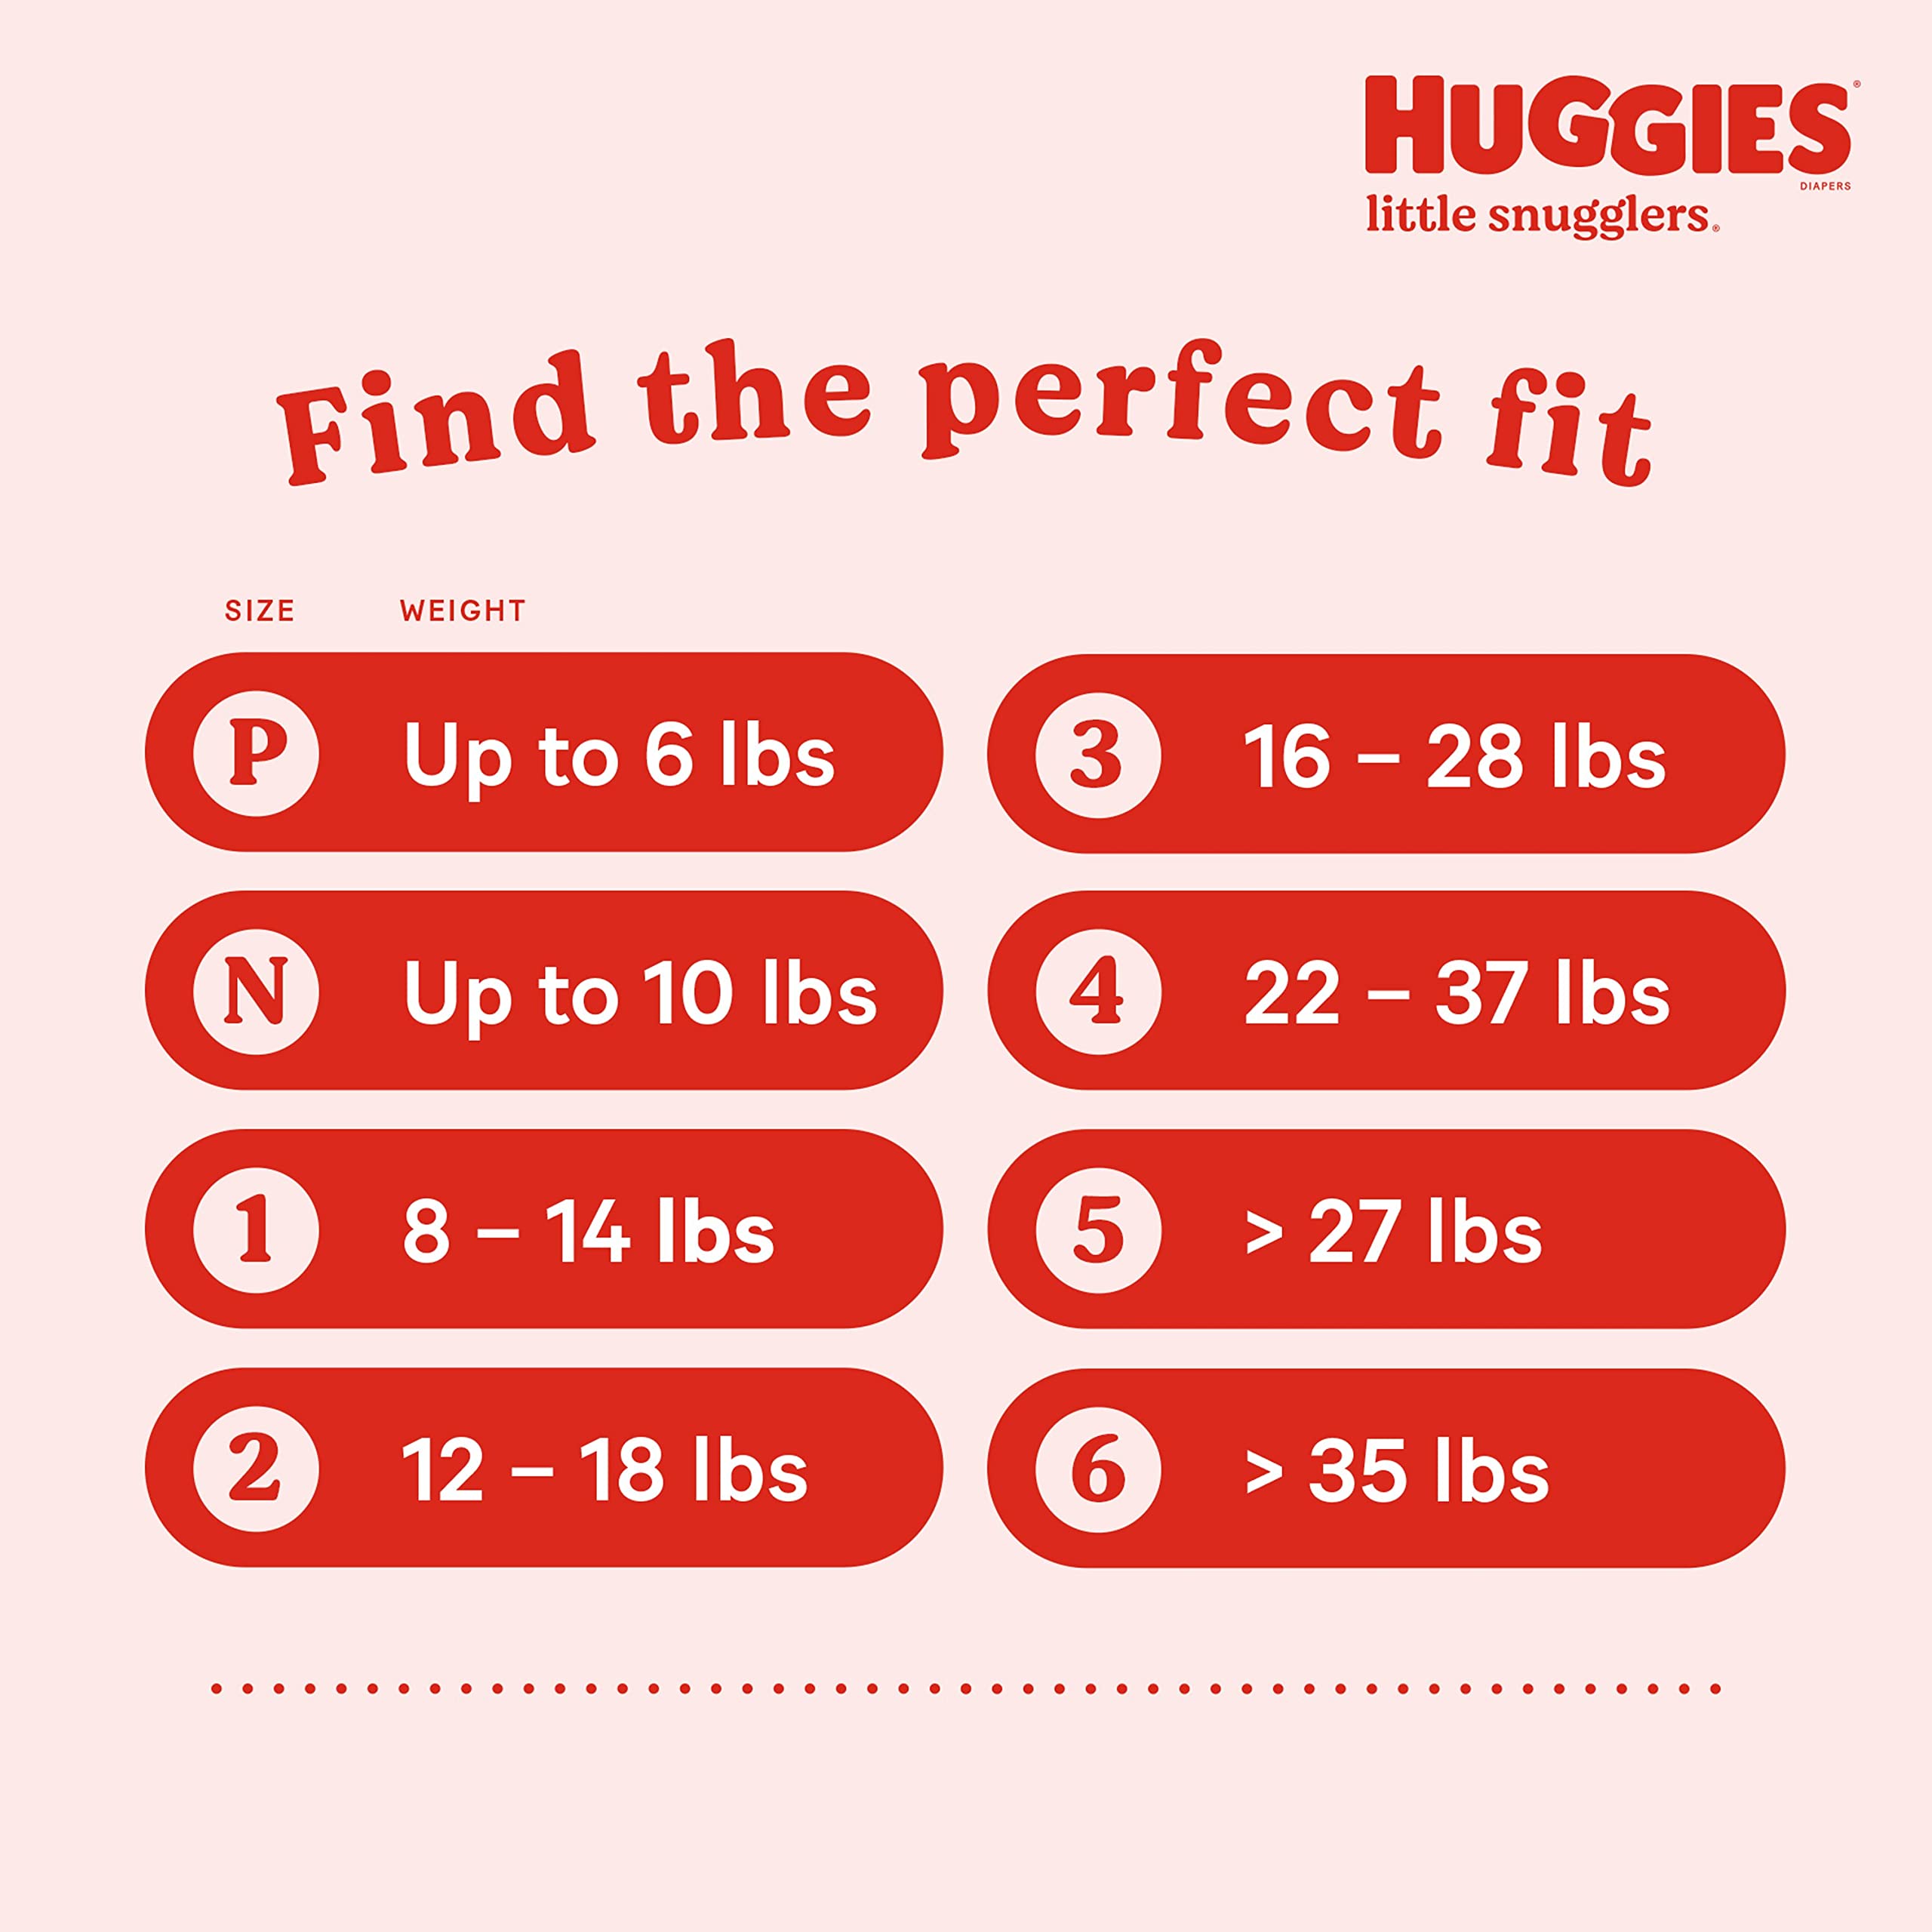 Huggies Little Snugglers Baby Diapers, Size Newborn (up to 10 lbs), 76 Ct, Newborn Diapers